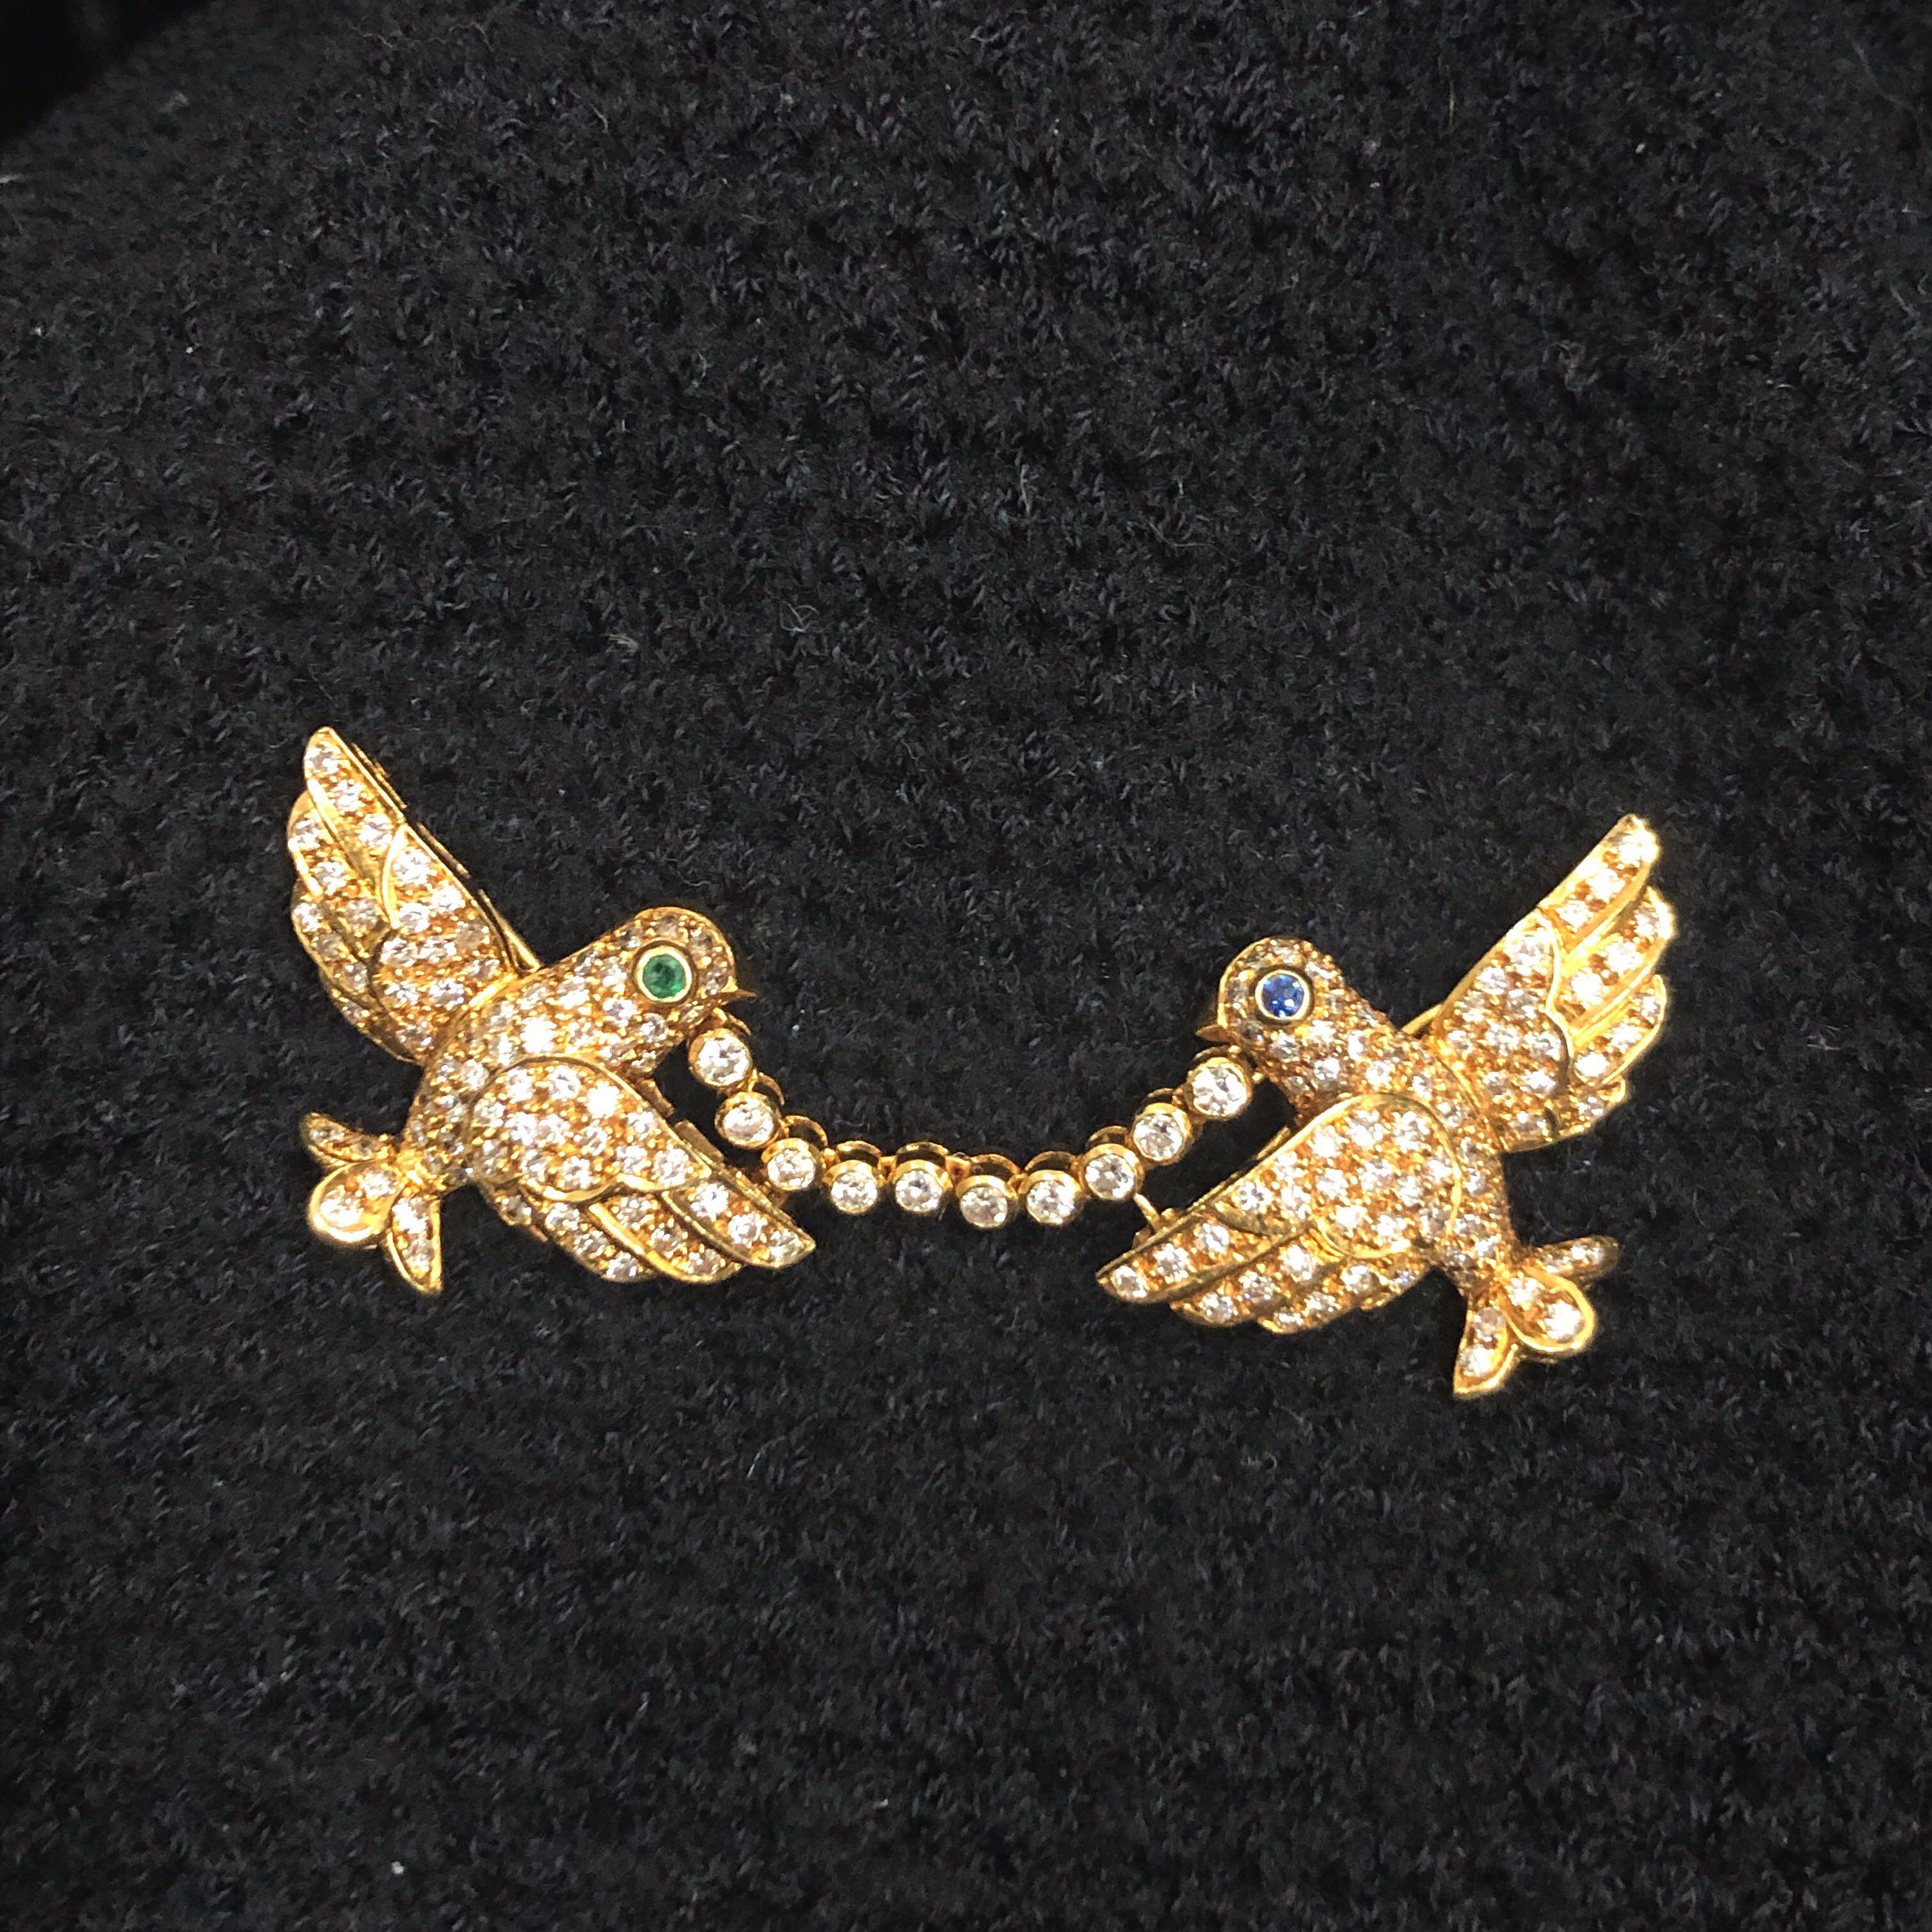 Mayor's Vintage 18k Yellow Gold 1cttw Diamond Emerald Sapphire Birds Brooch

Condition:  Excellent Condition
Metal:  18k Gold (Marked, and Professionally Tested)
Diamonds:  Round Brilliant Diamonds 1cttw
Diamond Color and Clarity:  F-G and